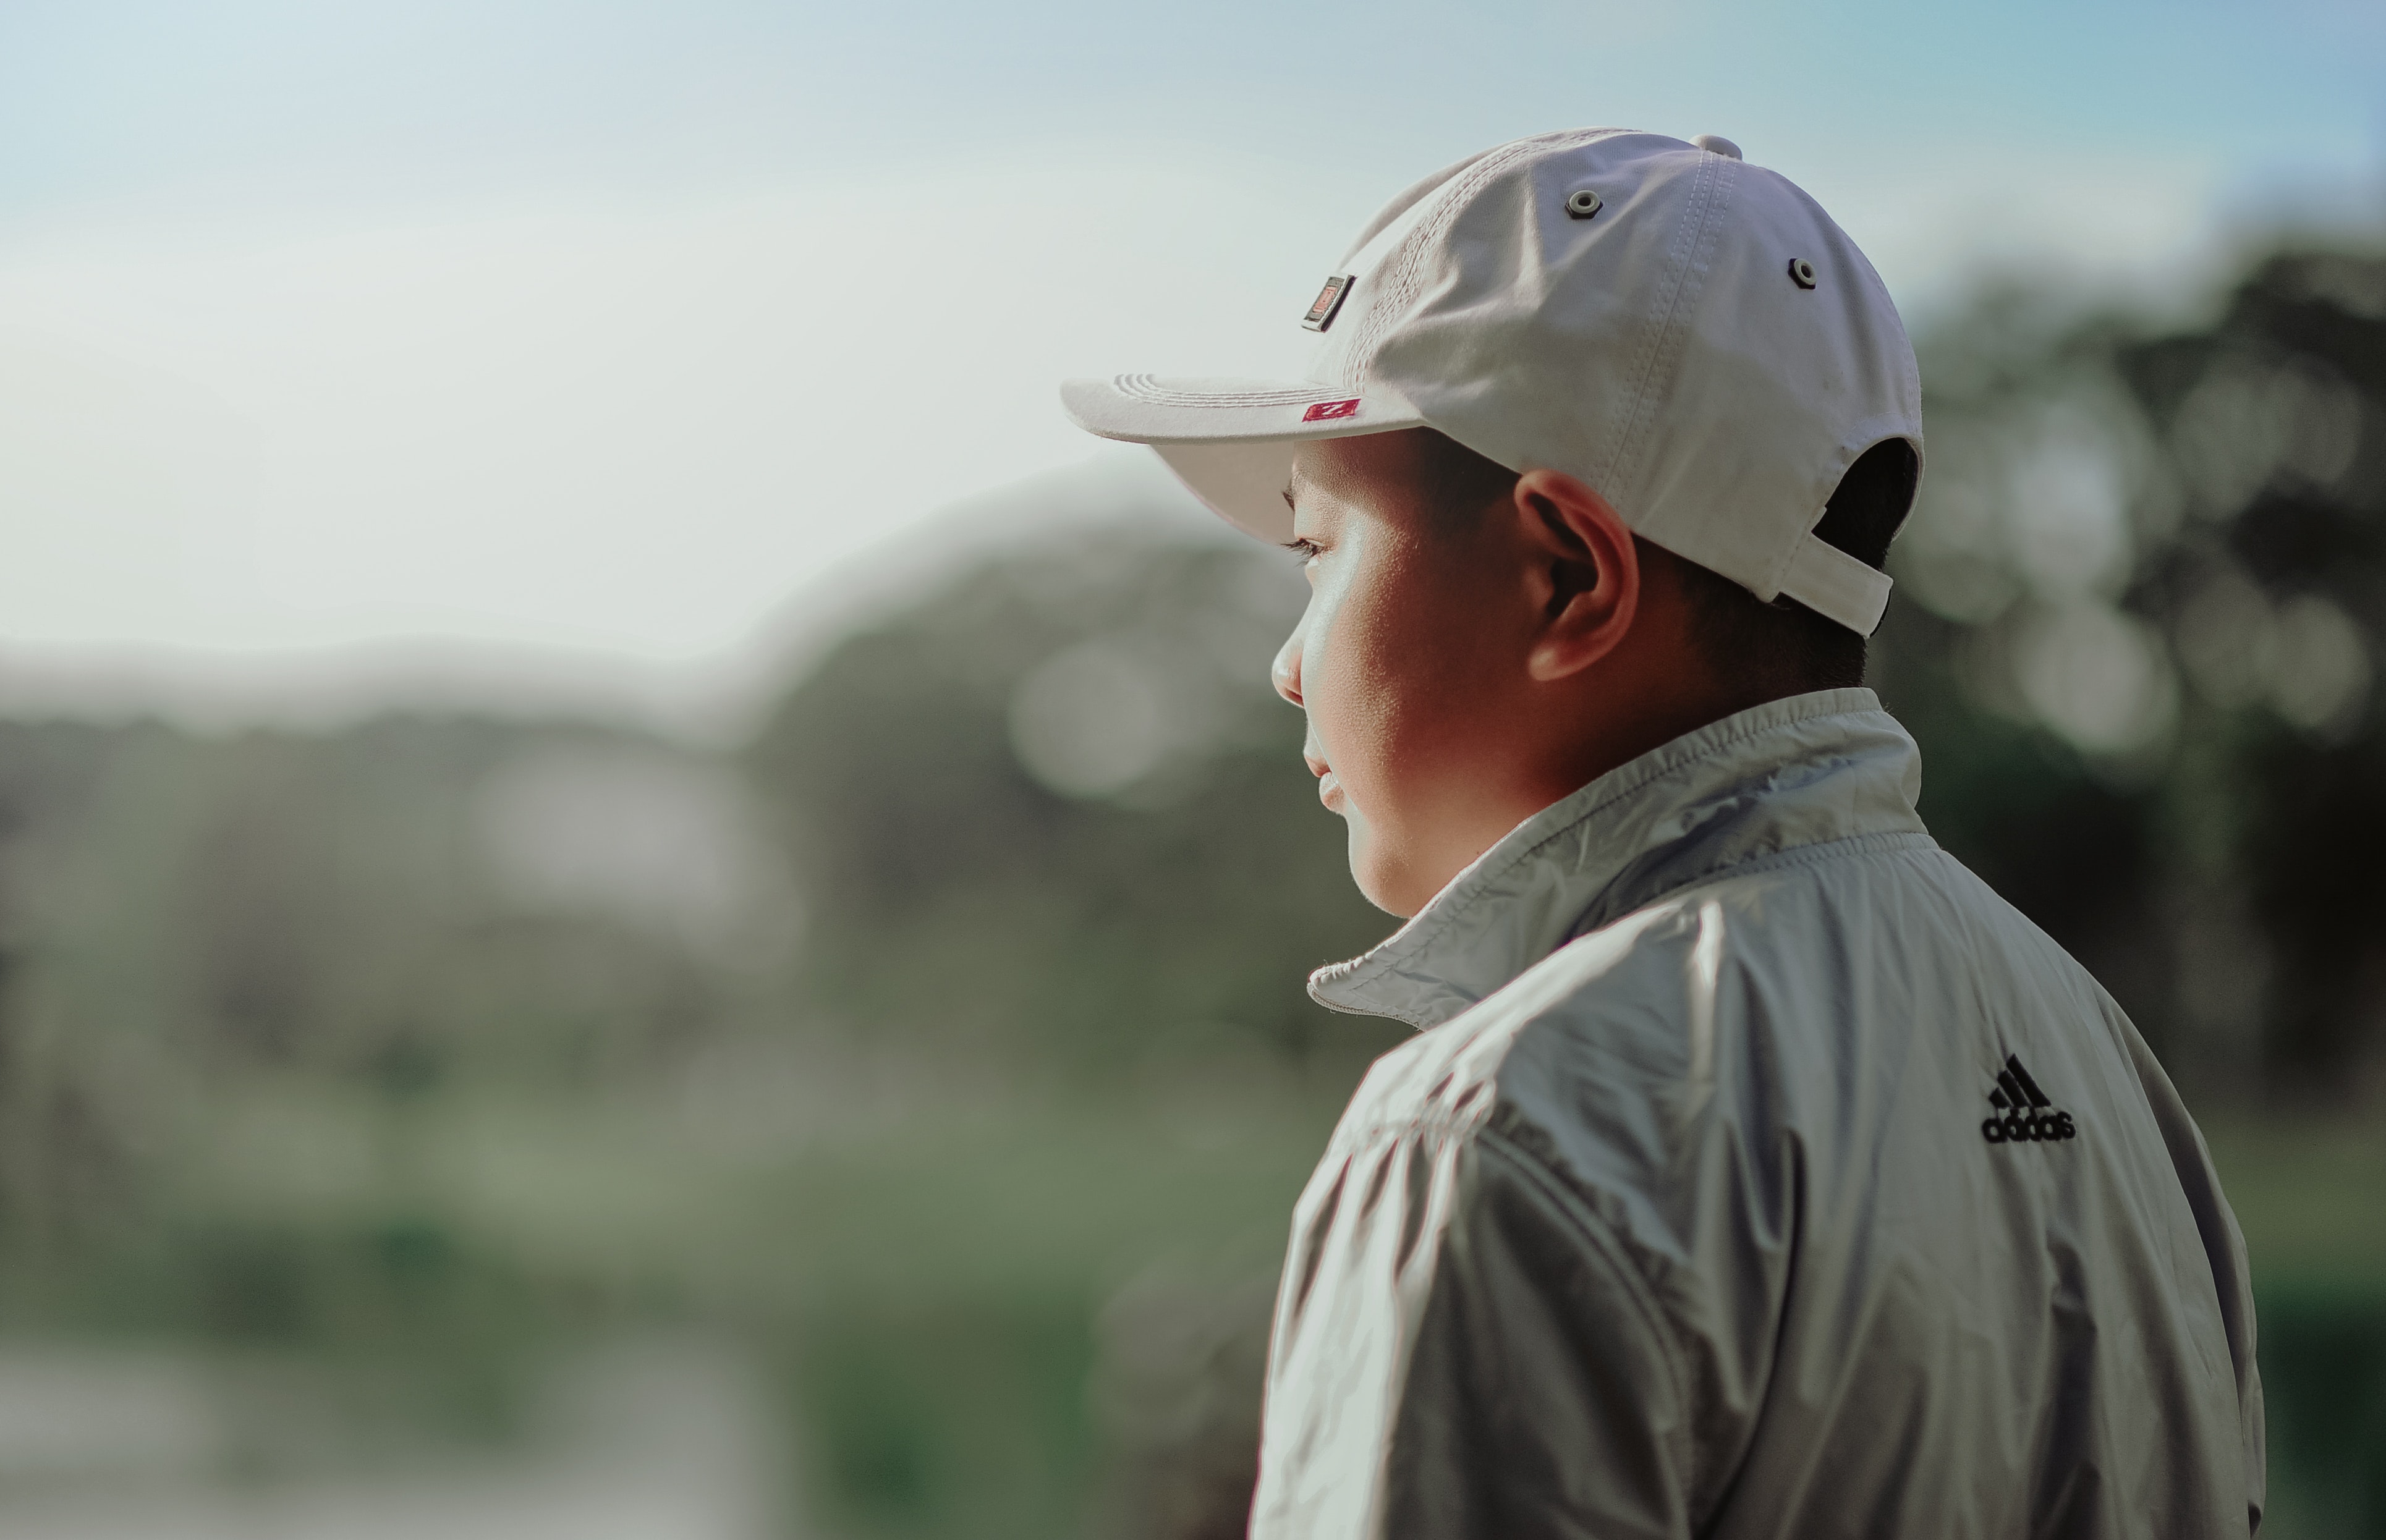 Free photo: Boy Wearing Adidas Jacket and Gray Fitted Cap - Blur ...